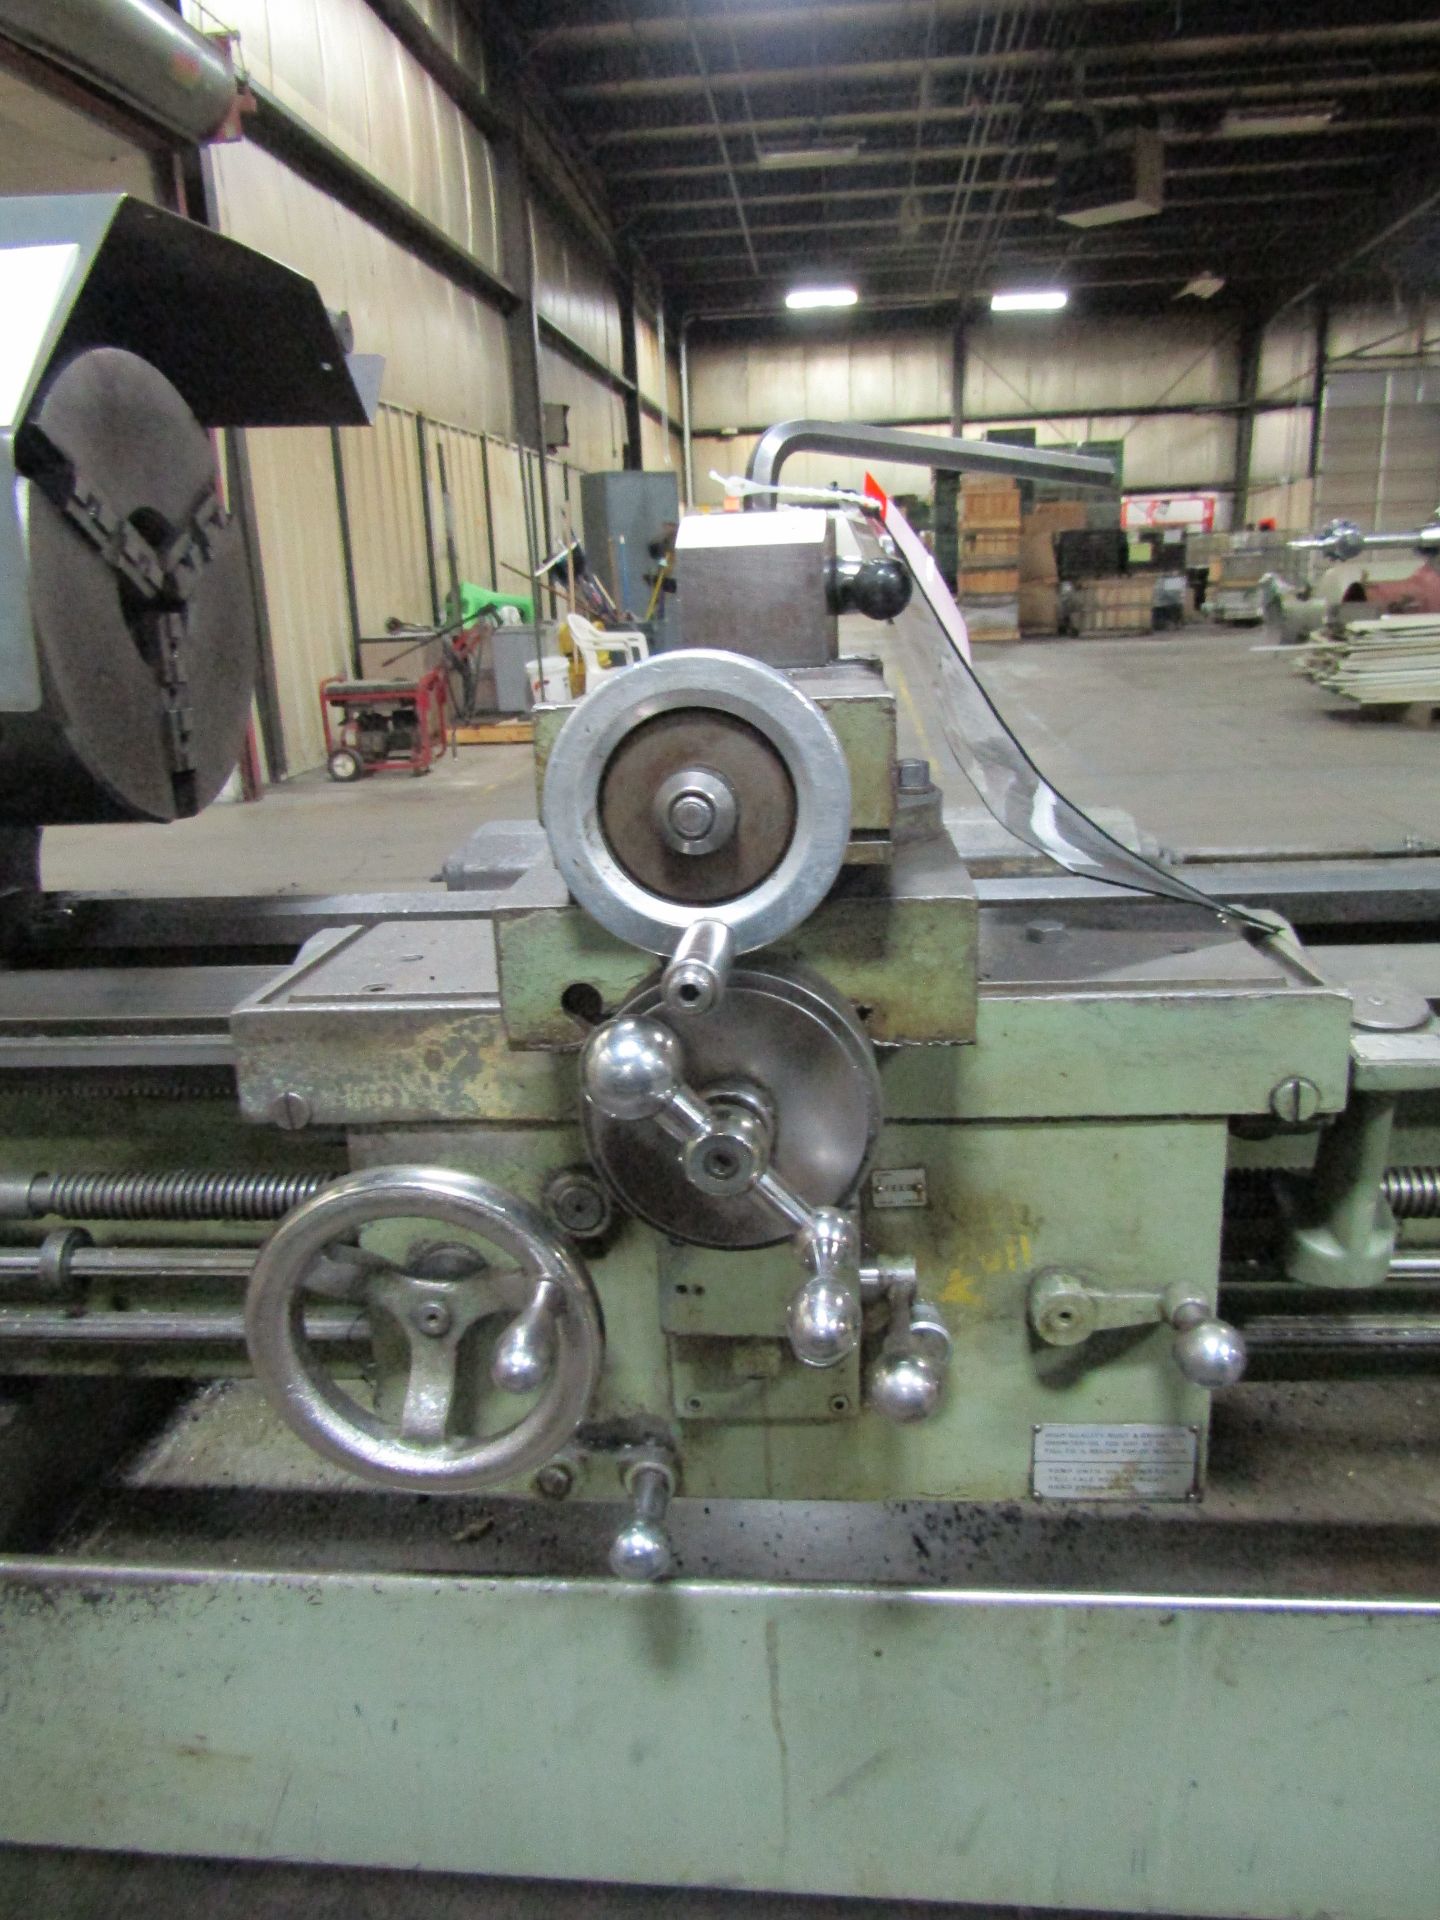 Leblond Lathe 19 1/2 X 54 S#: 7E2025 W/ 3-Jaw Chuck, 4-Jaw Chuck, And Tool Post - Image 6 of 6